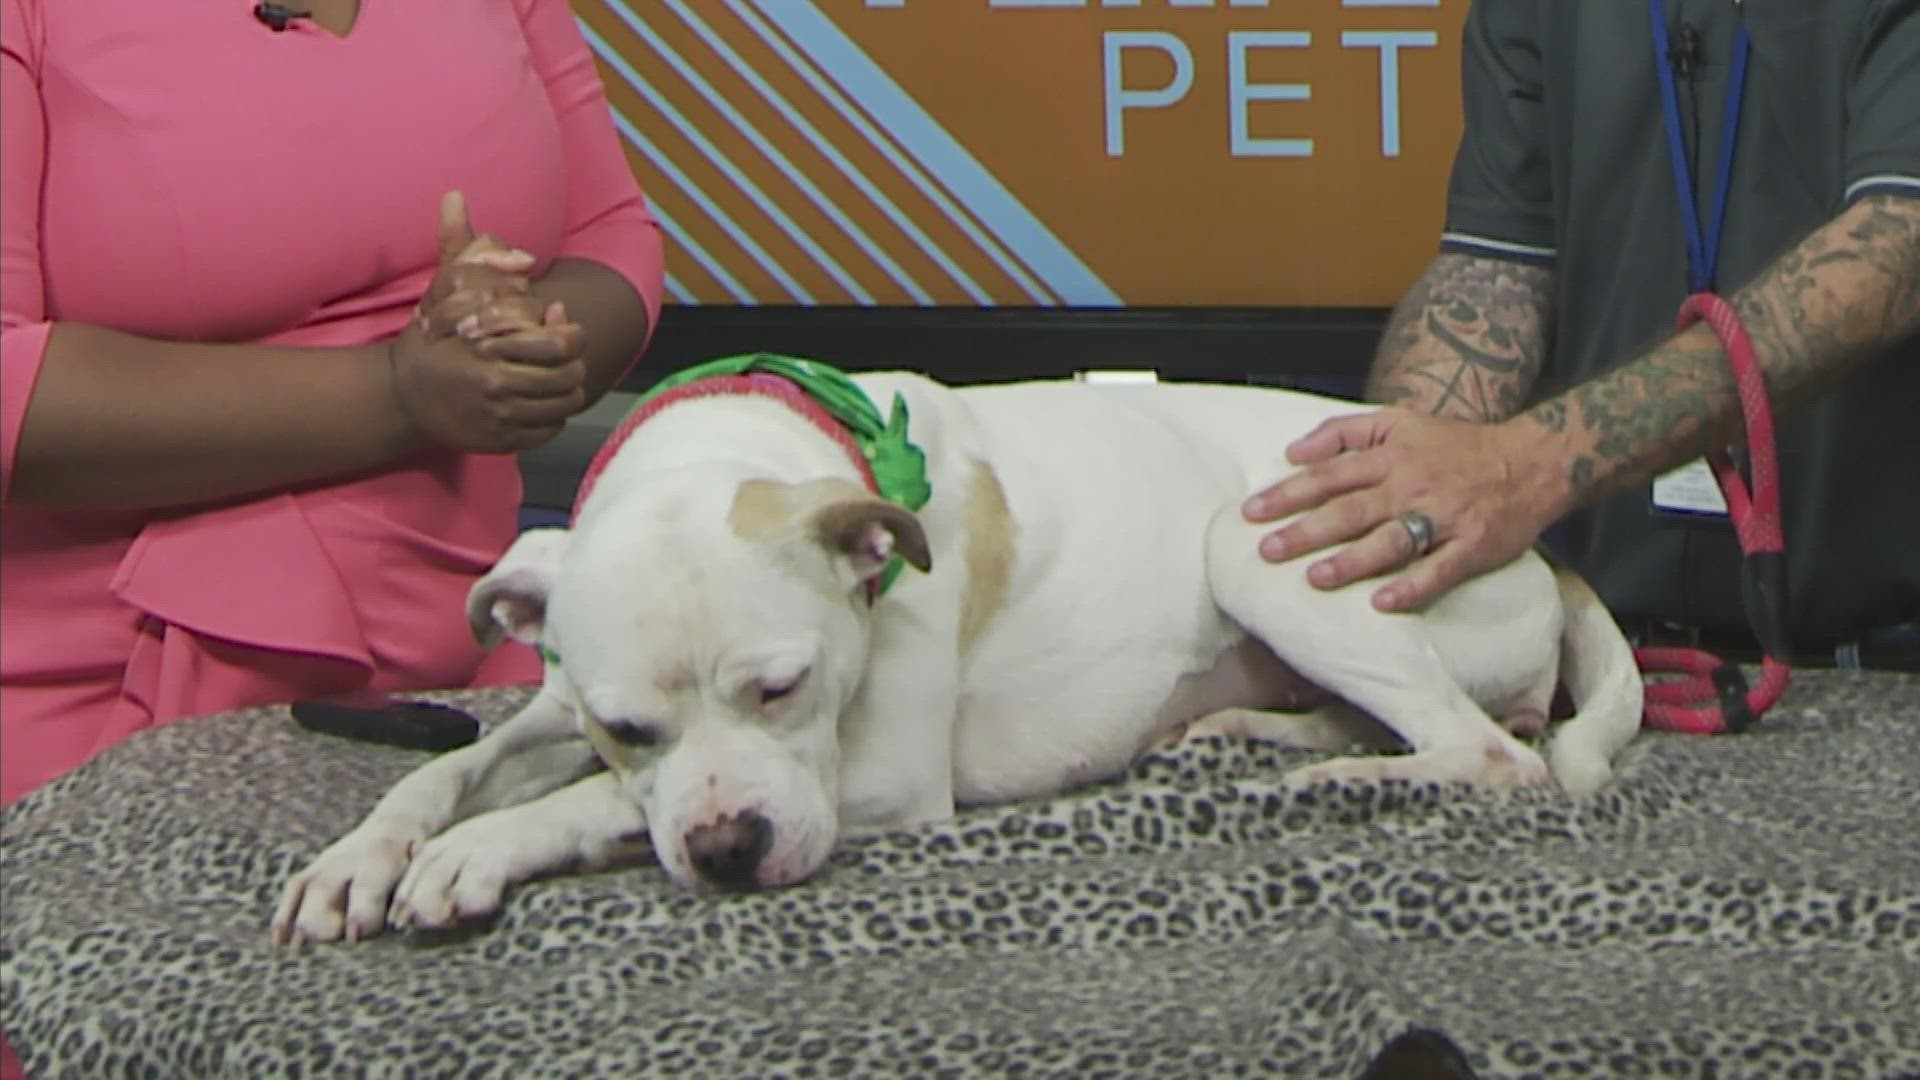 Killeen Animal Shelter boxer adopted after feature on Texas Today |  